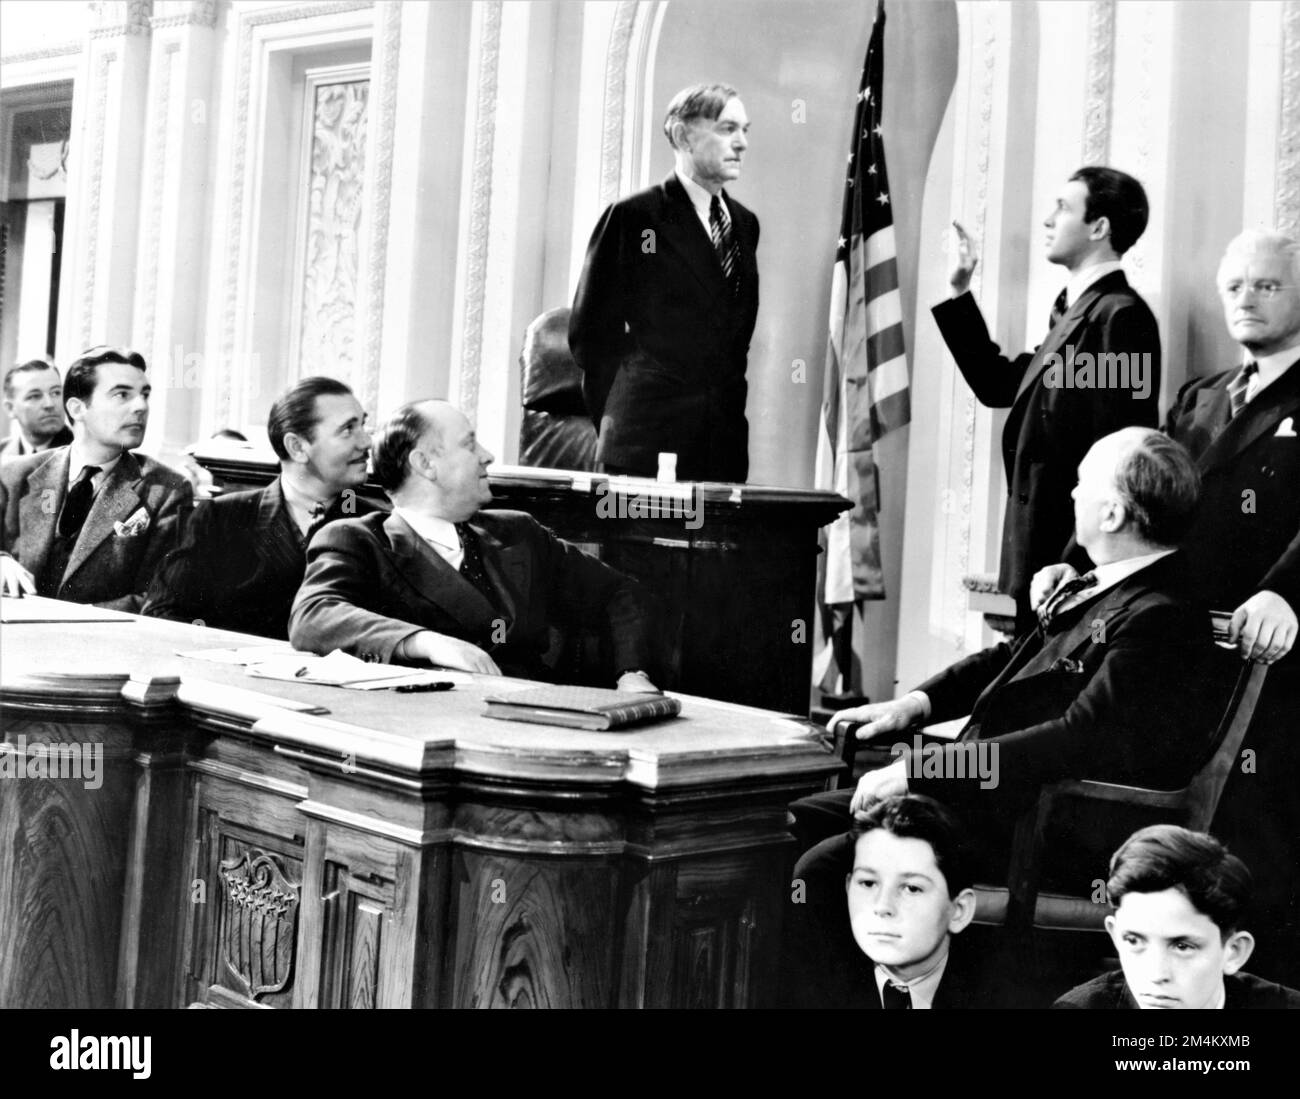 HARRY CAREY JAMES STEWART and CLAUDE RAINS in MR. SMITH GOES TO WASHINGTON 1939 director FRANK CAPRA story Lewis R. Foster screenplay Sidney Buchman music Dimitri Tiomkin Columbia Pictures Stock Photo